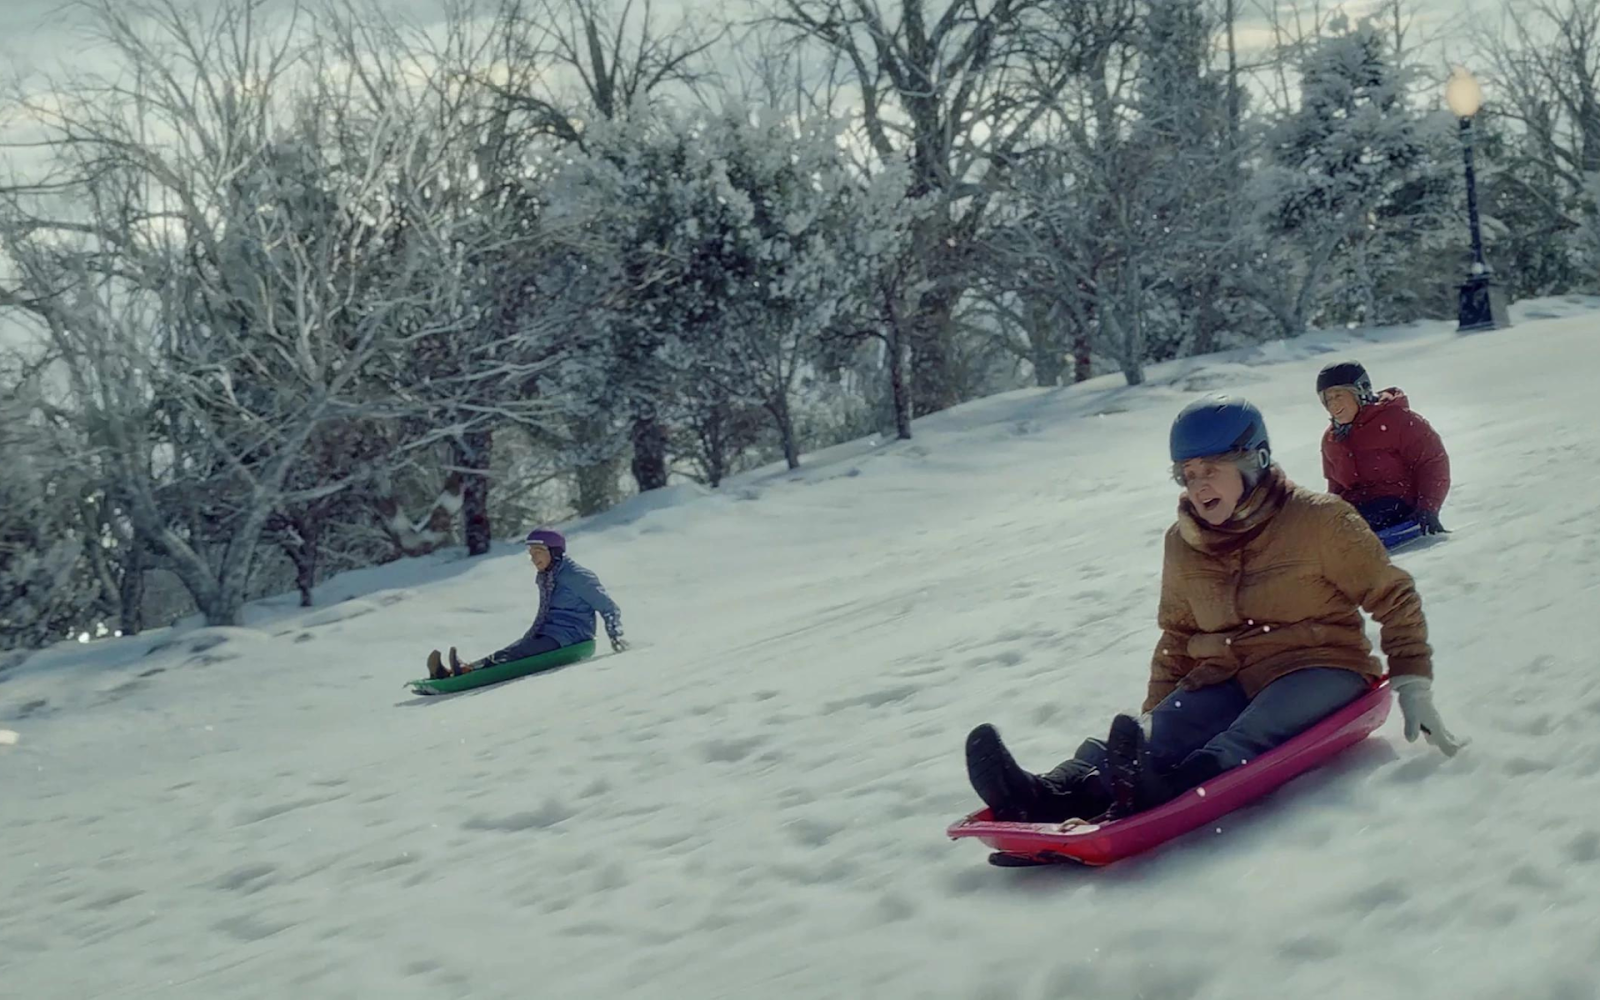 A couple of people sledding down a snowy hillDescription automatically generated